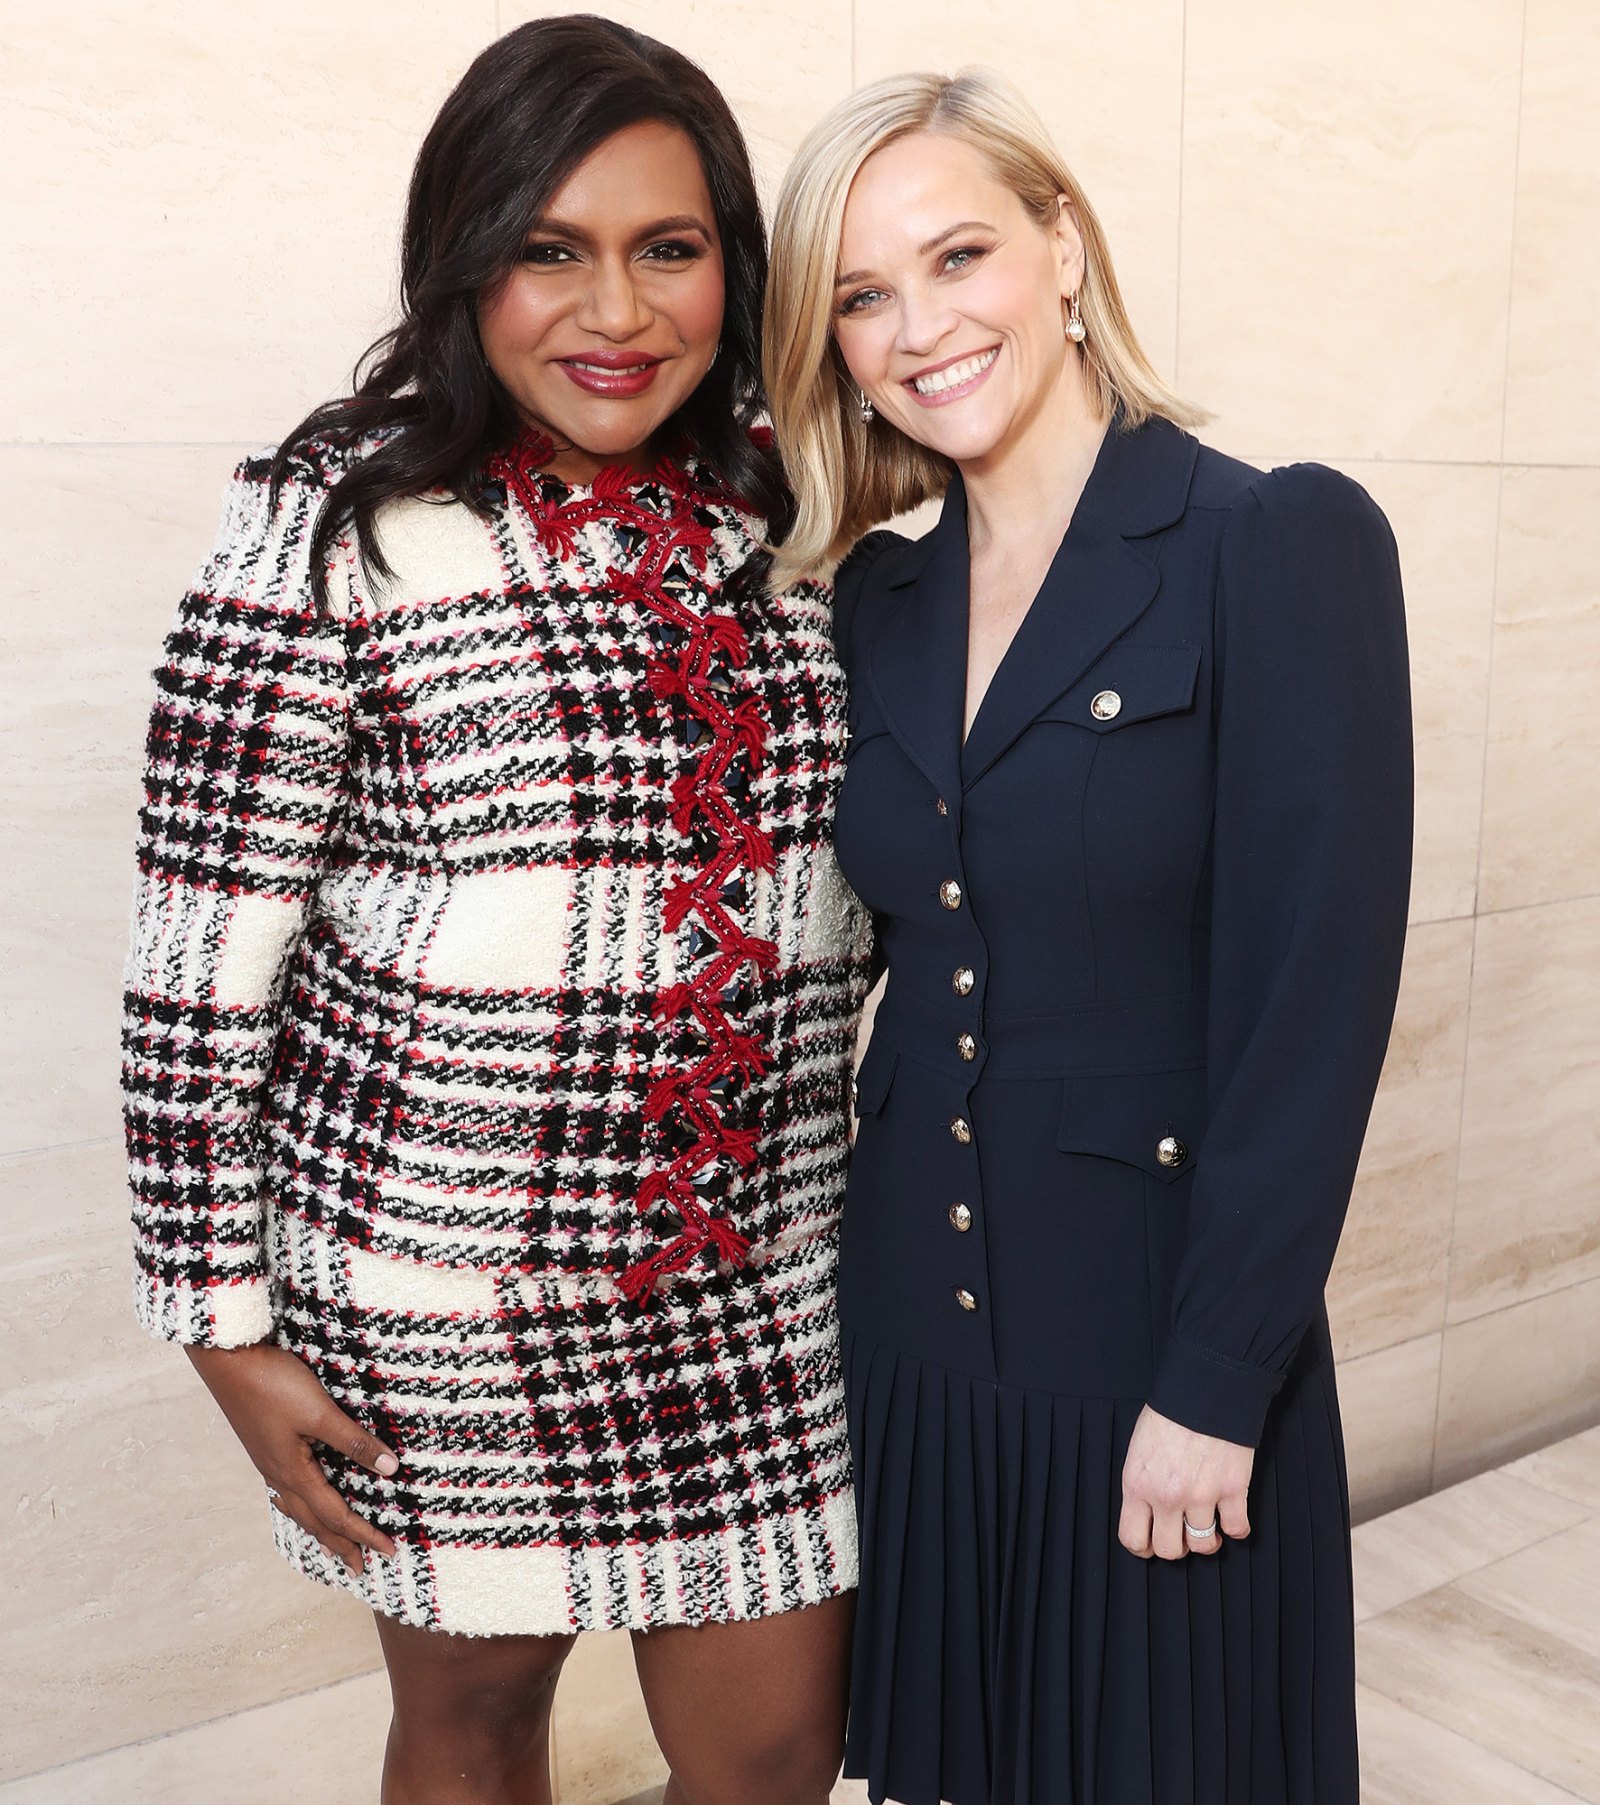 Mindy Kaling- Reese Witherspoon Sent a Thoughtful Gift for My Son Spencer